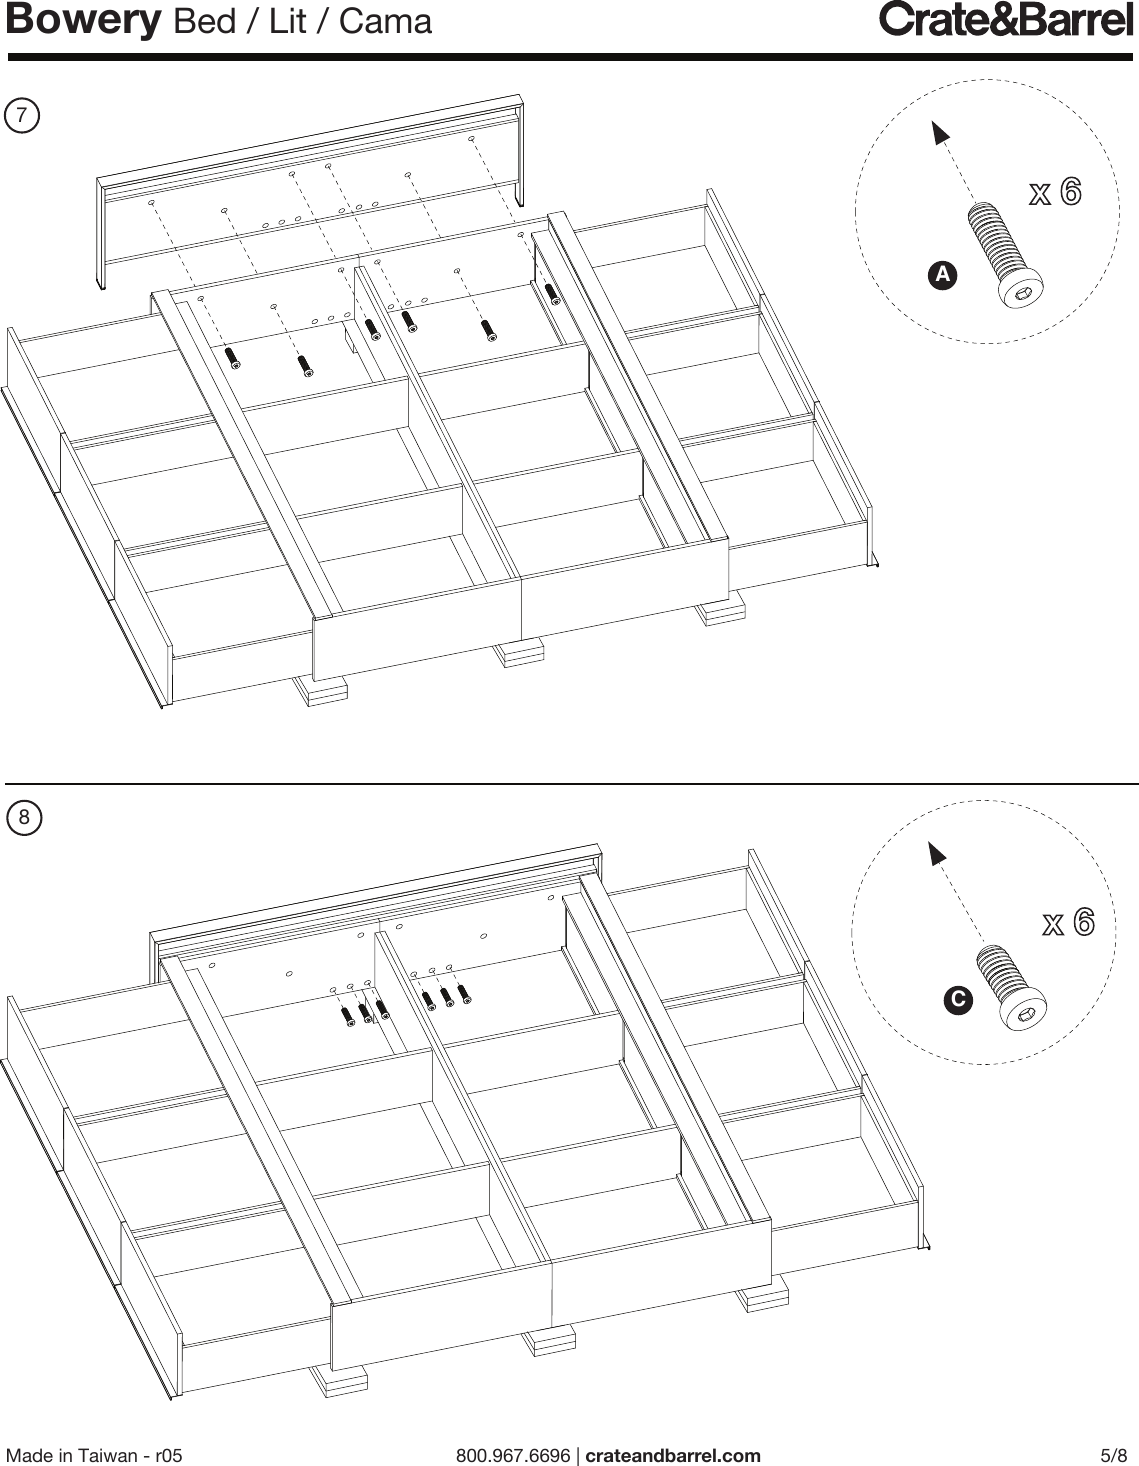 Page 5 of 8 - Crate-Barrel 304-Bowery-Bed-Ml Bowery Bed ML Assembly Instructions From Crate And Barrel